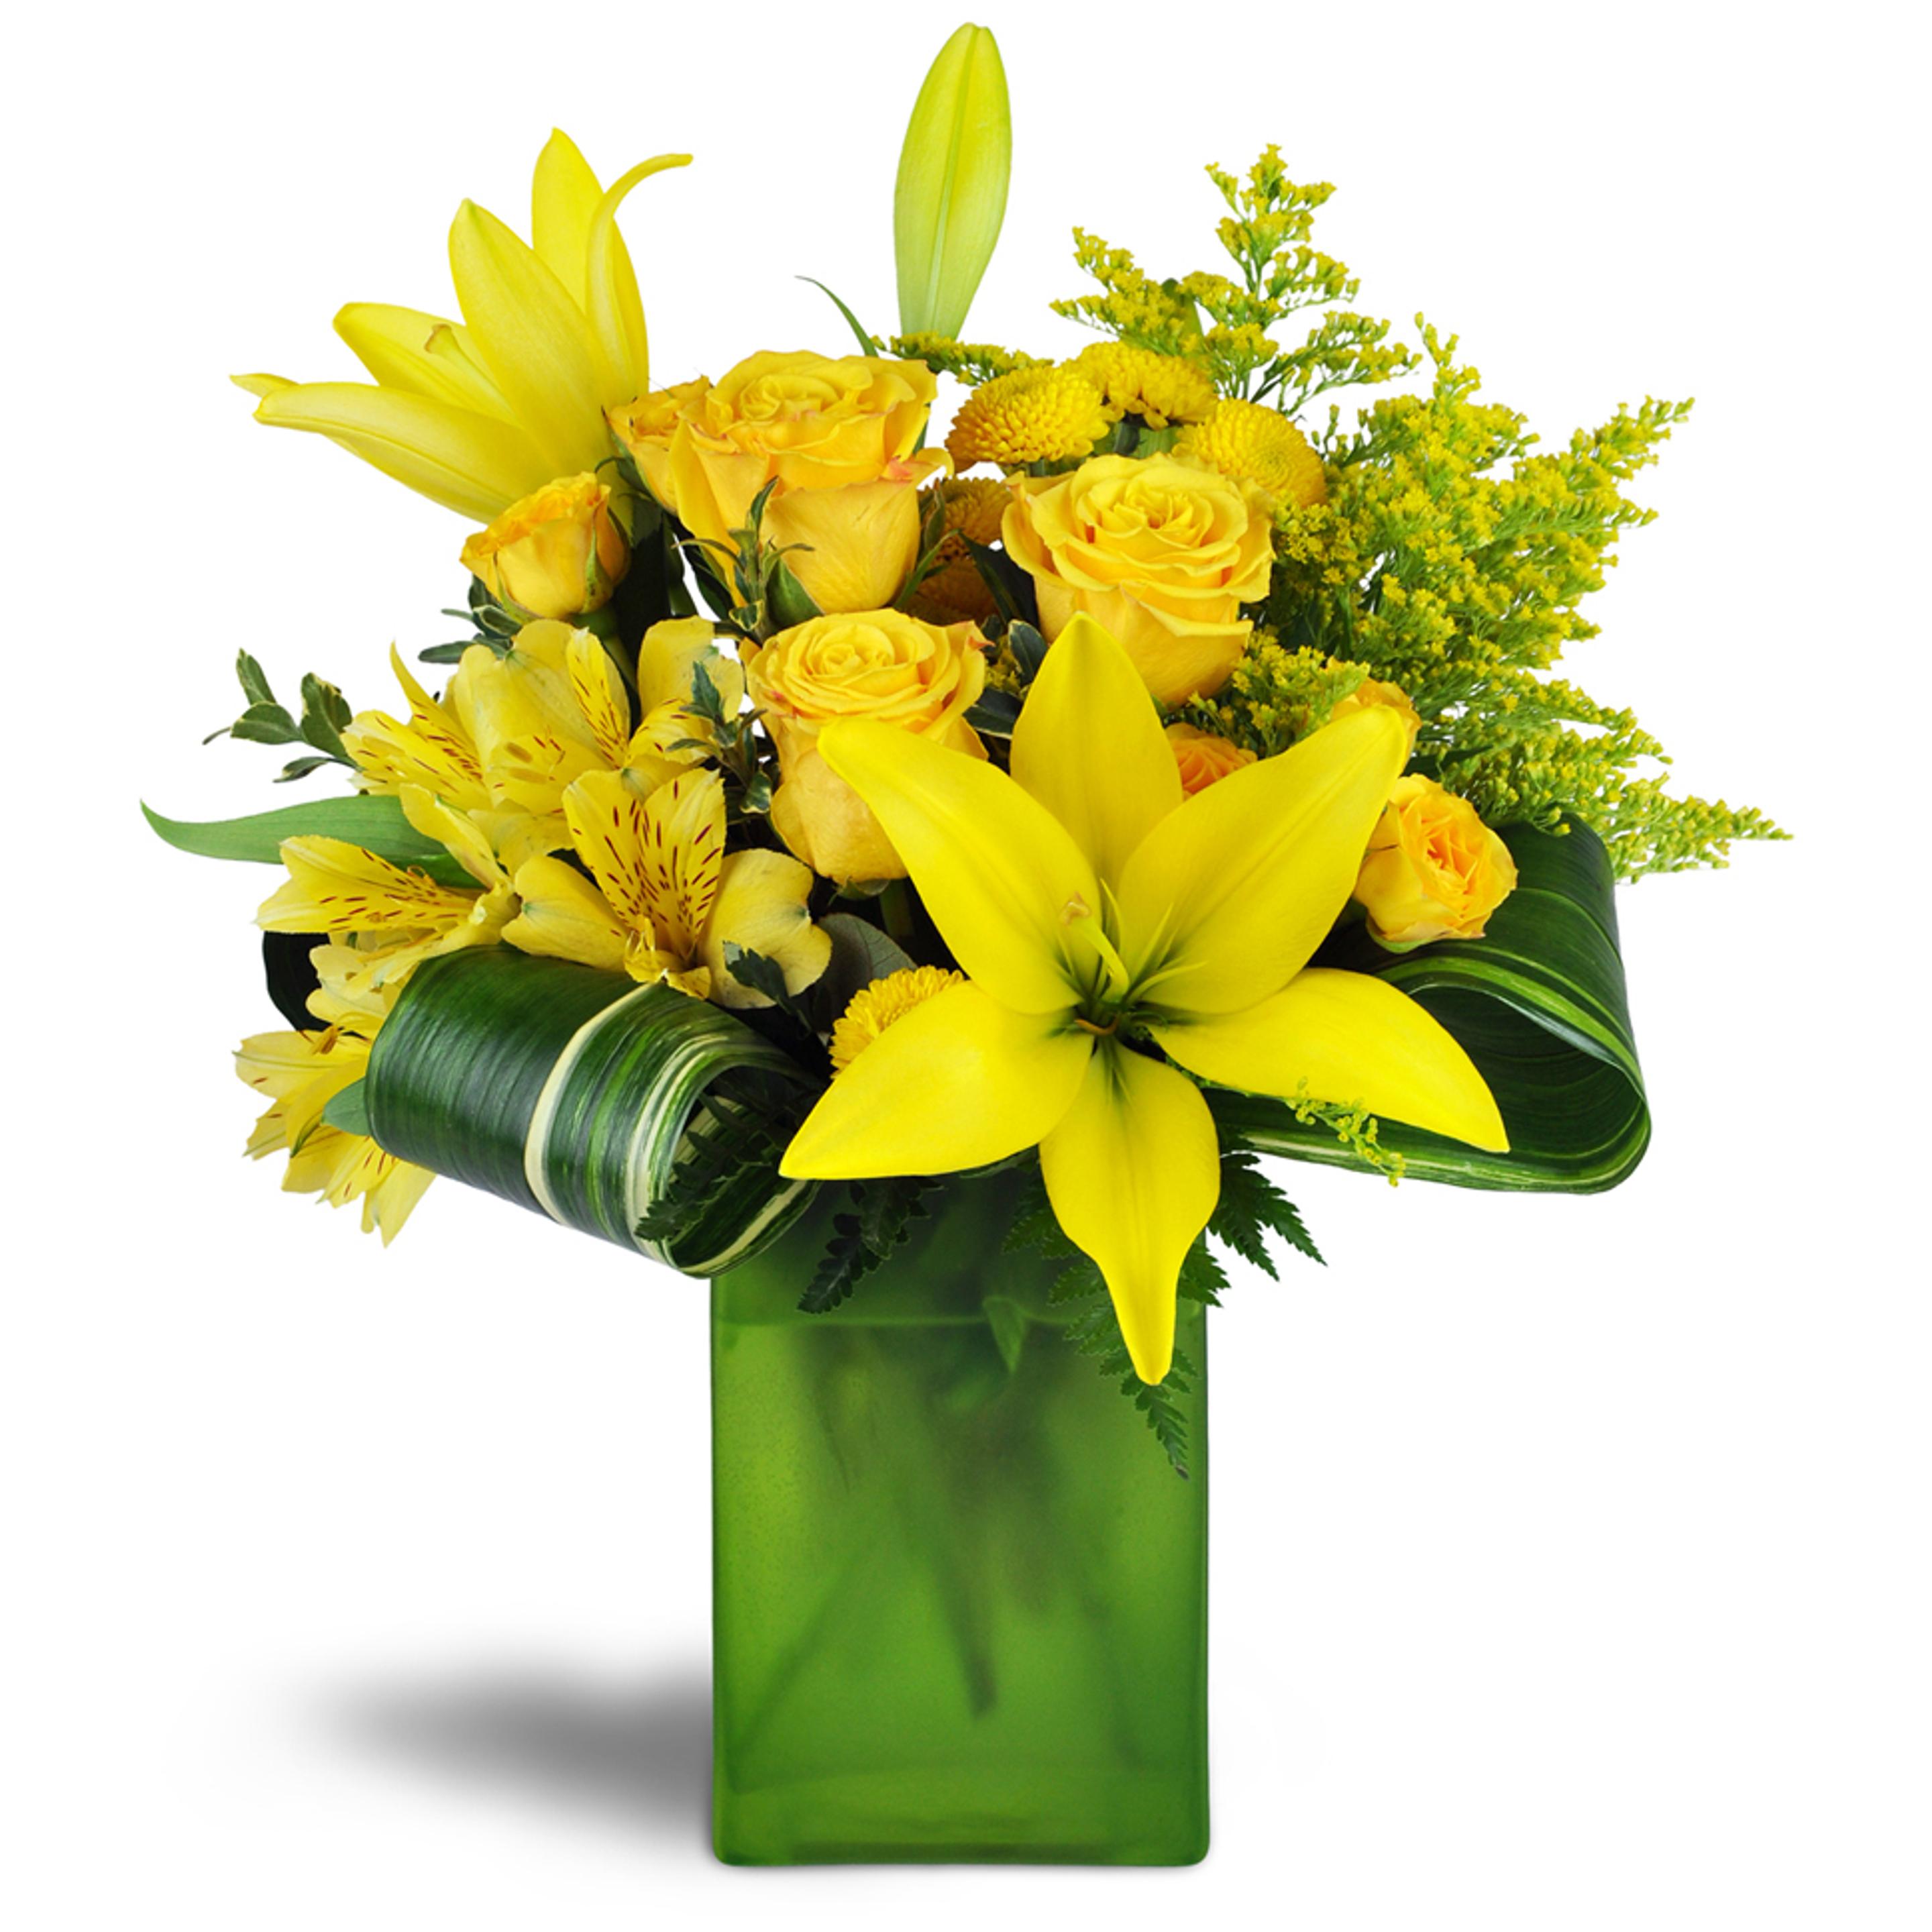 Yellow Flower Arrangement - a sunny bouquet of yellow lilies, roses, spray roses in a green vase.